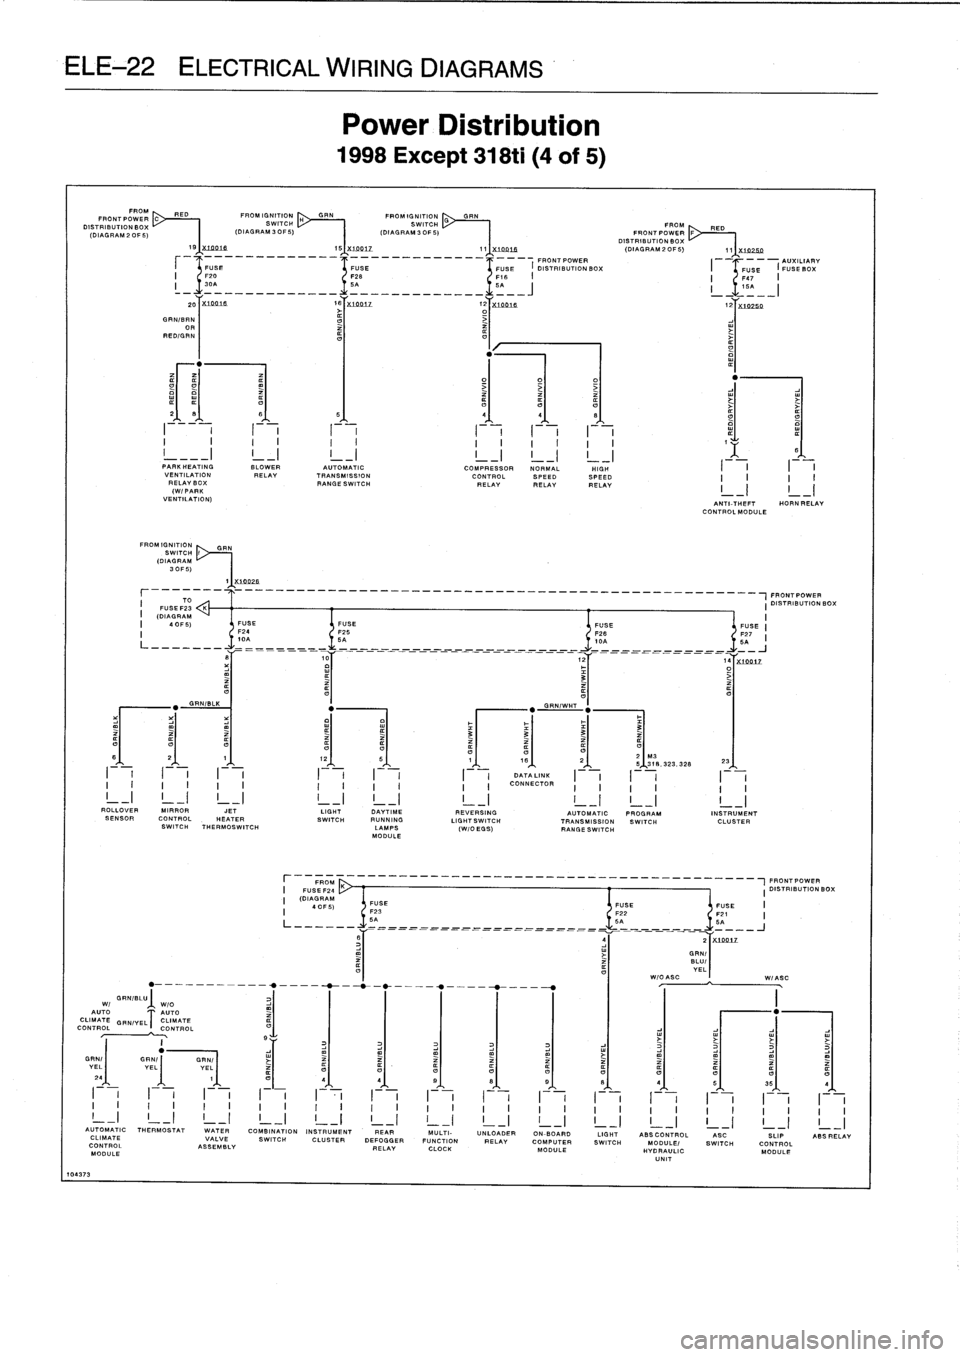 BMW 318i 1997 E36 Service Manual 
ELE-22

ELECTRICAL
WIRING
DIAGRAMS

GRNIBLU
Wl

WIO

AUTO

AUTO

CLIMATE

GEN/YELT
CLIMATE

CONTROL

CONTROL

10437
3

FP

OM~
	

PED
FRONTPOWER
DISTRIBUTION

BOY%

(DIAGRAM

2
OF
5)

S

FROMIGNITION